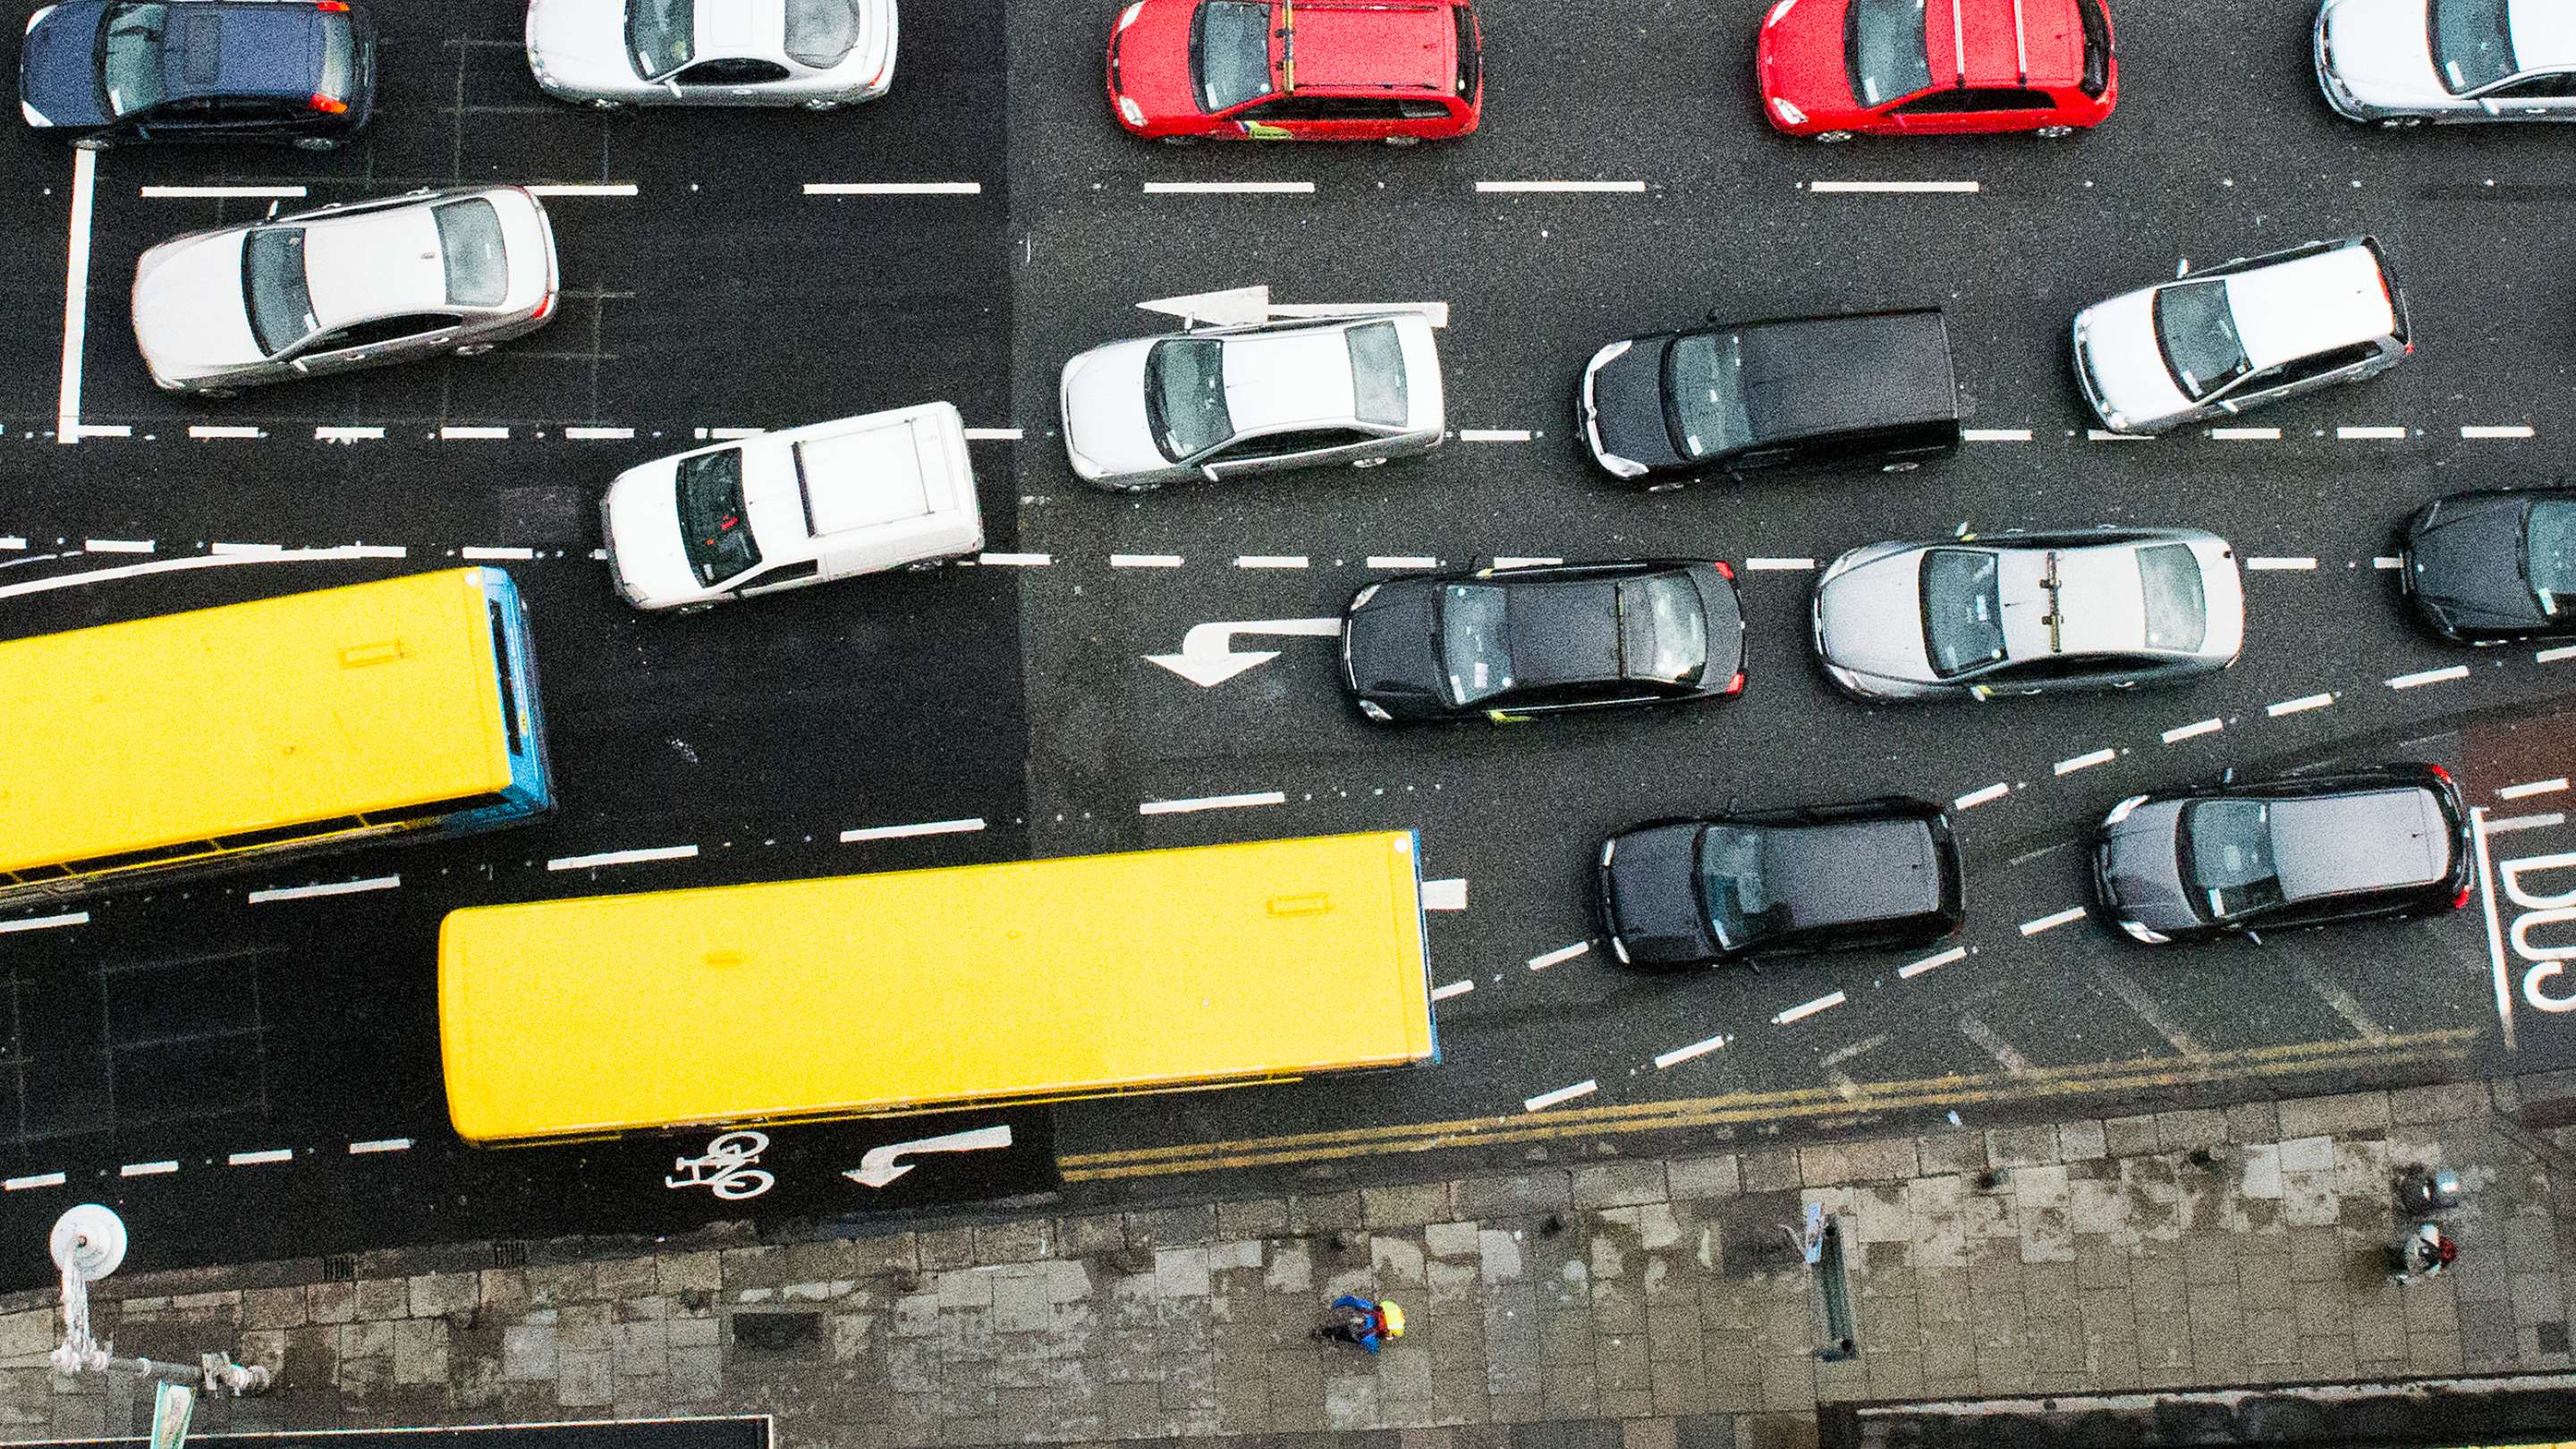 Overhead view of traffic in a city. Buses and cars waiting to cross a junction.